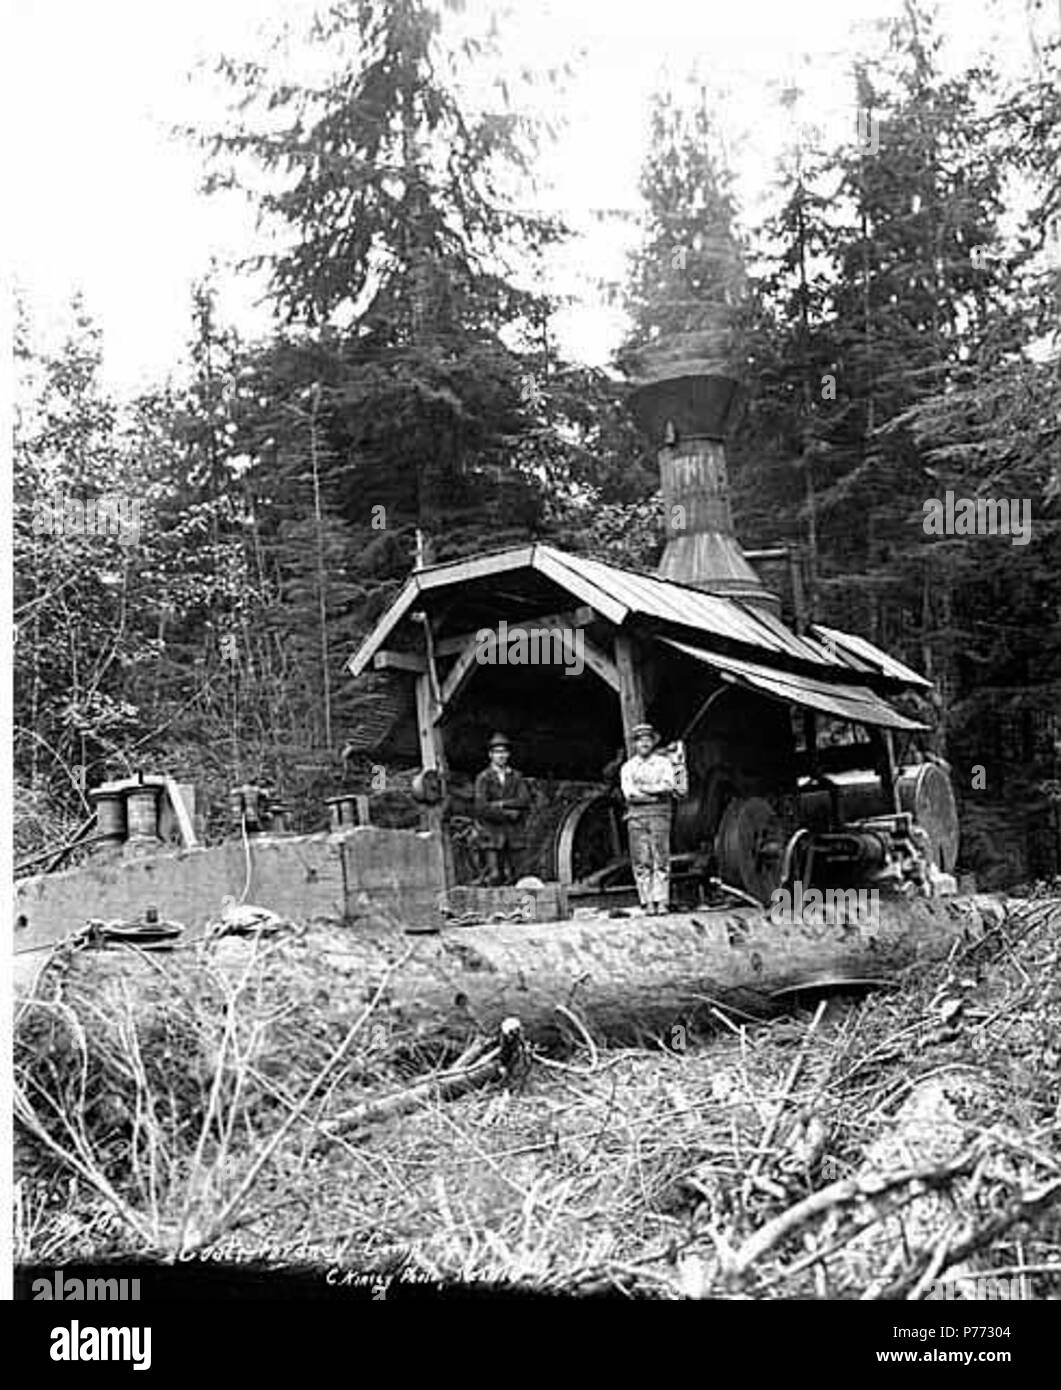 . English: Donkey engine and crew, camp 4, Coats-Fordney Lumber Company, near Aberdeen, ca. 1920 . English: Caption on image: Coats-Fordney, Camp #4. C. Kinsey Photo, Seattle. No. 10 PH Coll 516.625 The Coats-Fordney Lumber Company started out as the A.F. Coats Lumber Company in 1905, headquartered in Aberdeen. It became the Coats-Fordney Lumber Company in 1910, and by 1924, it was called the Donovan-Corkery Lumber Company. Aberdeen is a city in Grays Harbor (formerly called Chehalis) County. The town was platted by Samuel Benn in 1884 on his homestead. Benn was born in New York City and in 18 Stock Photo